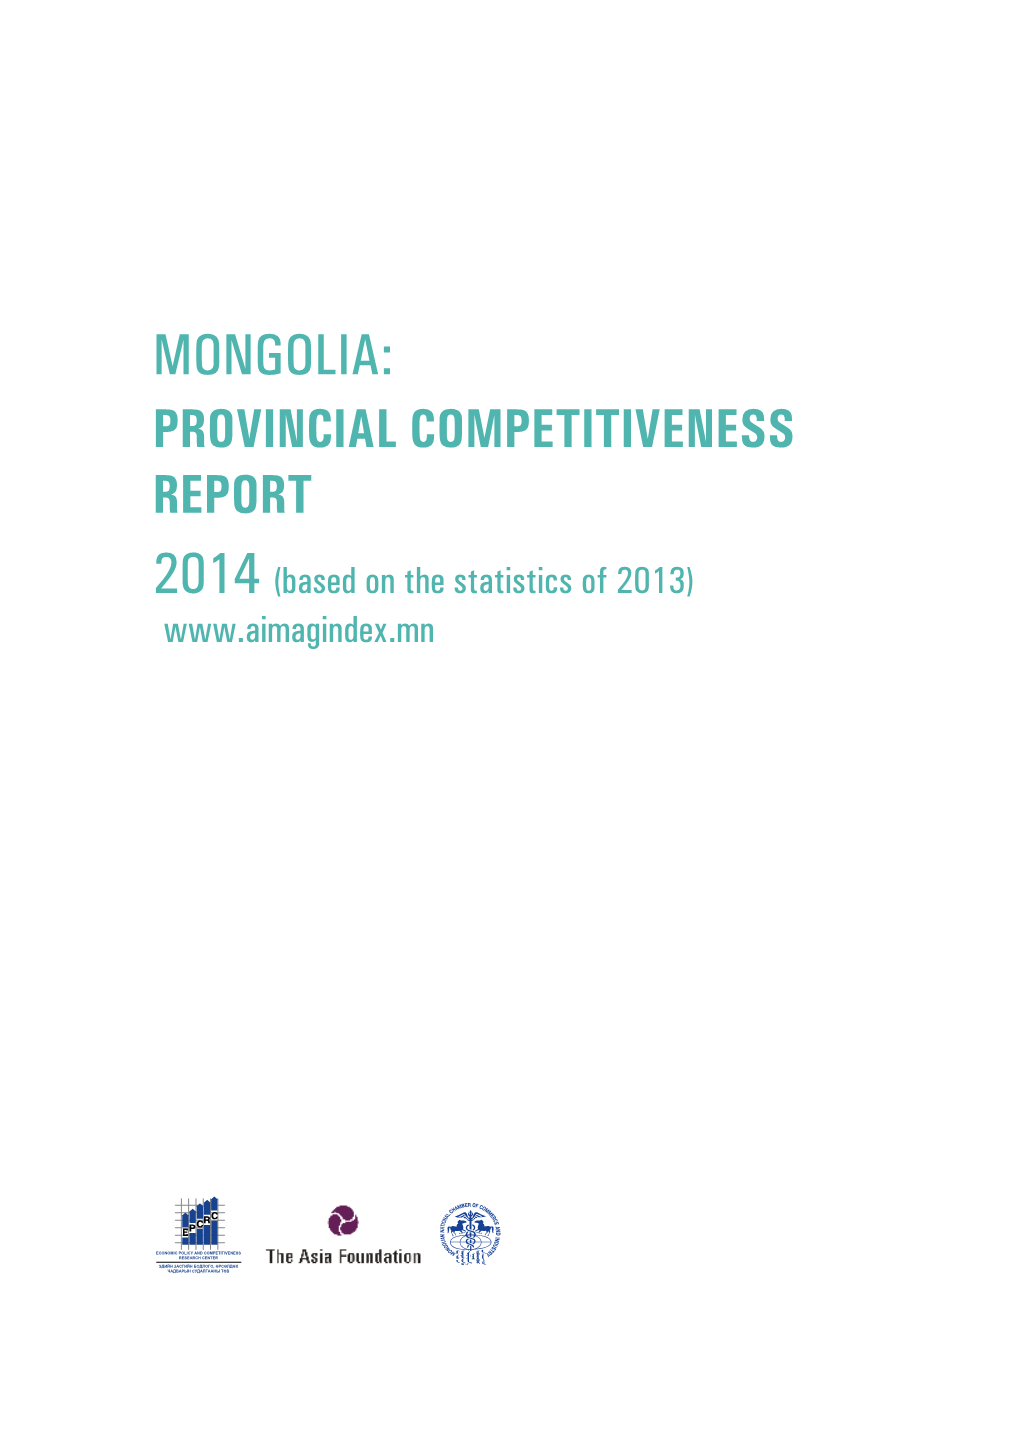 PROVINCIAL COMPETITIVENESS REPORT 2014 (Based on the Statistics of 2013)